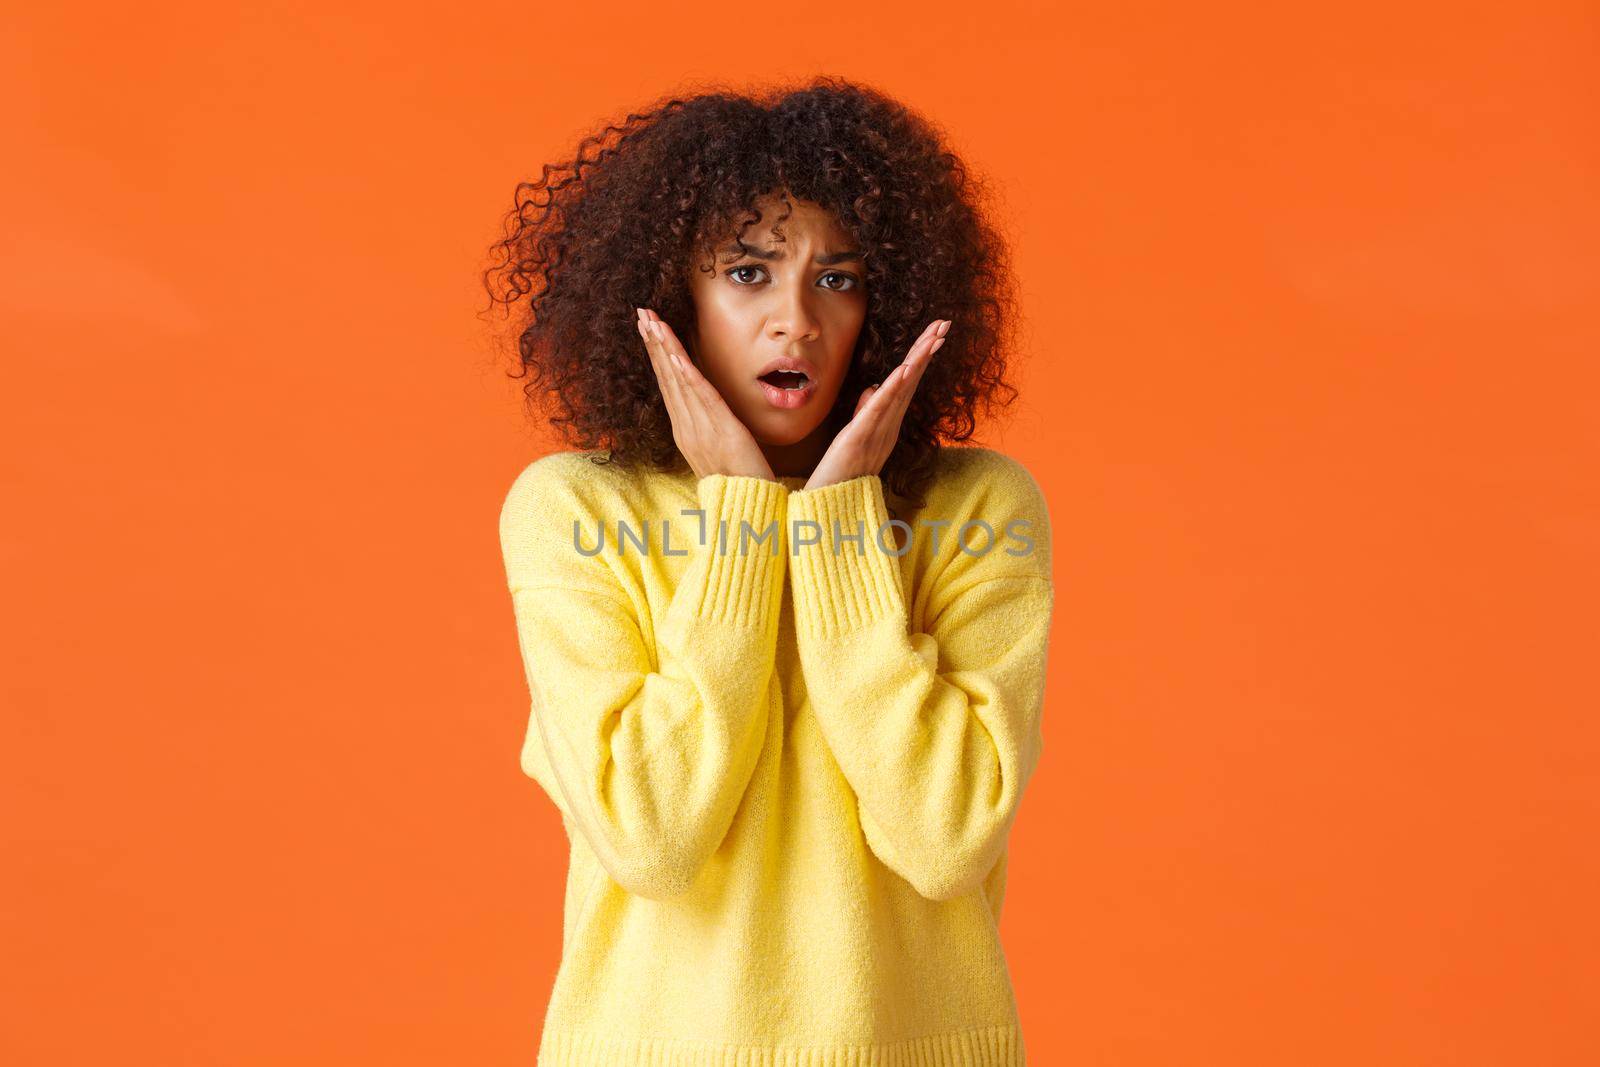 Scared timid and insecure lovely young girl with afro haircut, yellow sweater, gasping shocked and concerned, touching and staring in panic camera, feeling afraid, standing orange background.